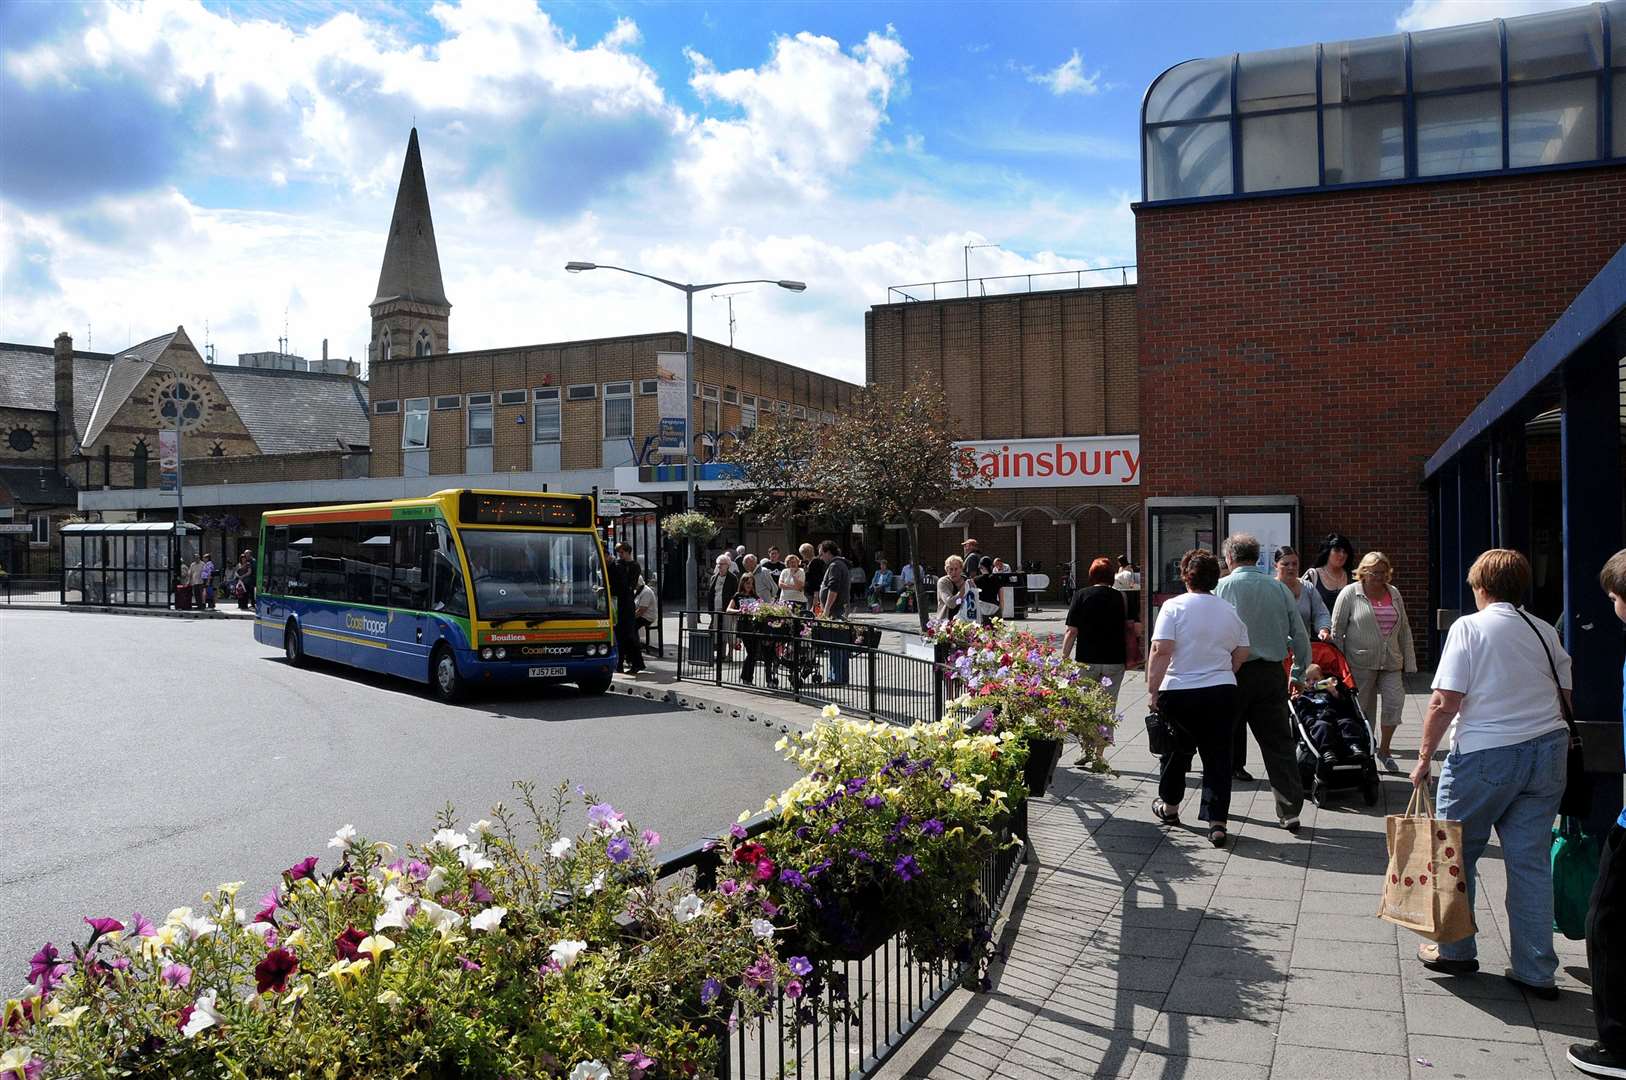 Lynn bus fares will be capped at £1.50 if journeys start and finish within the town zone